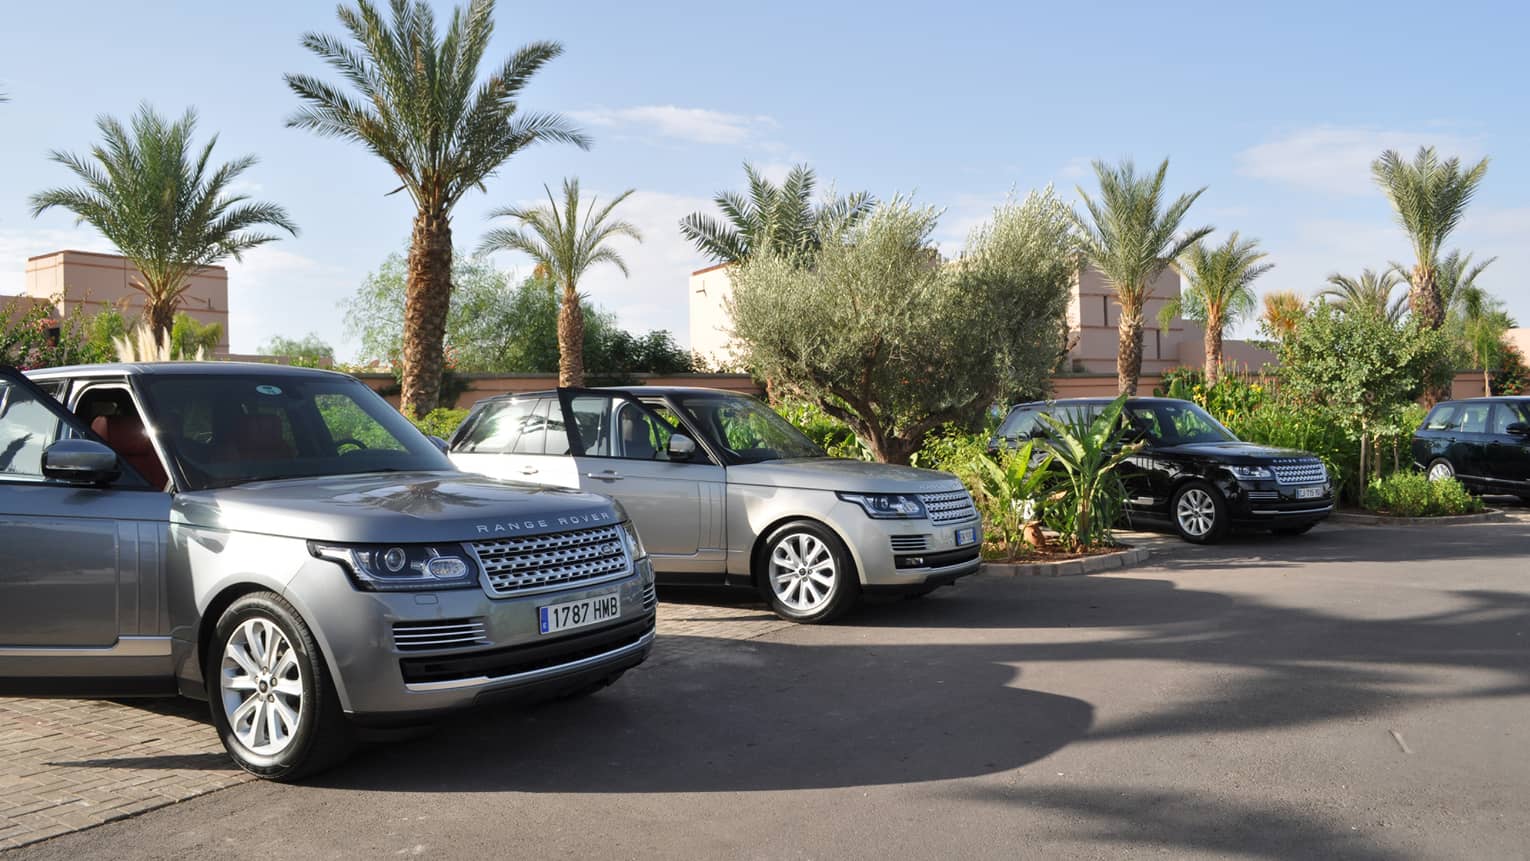 Luxury Range Rover cars with open doors parked under palm trees, blue sky 